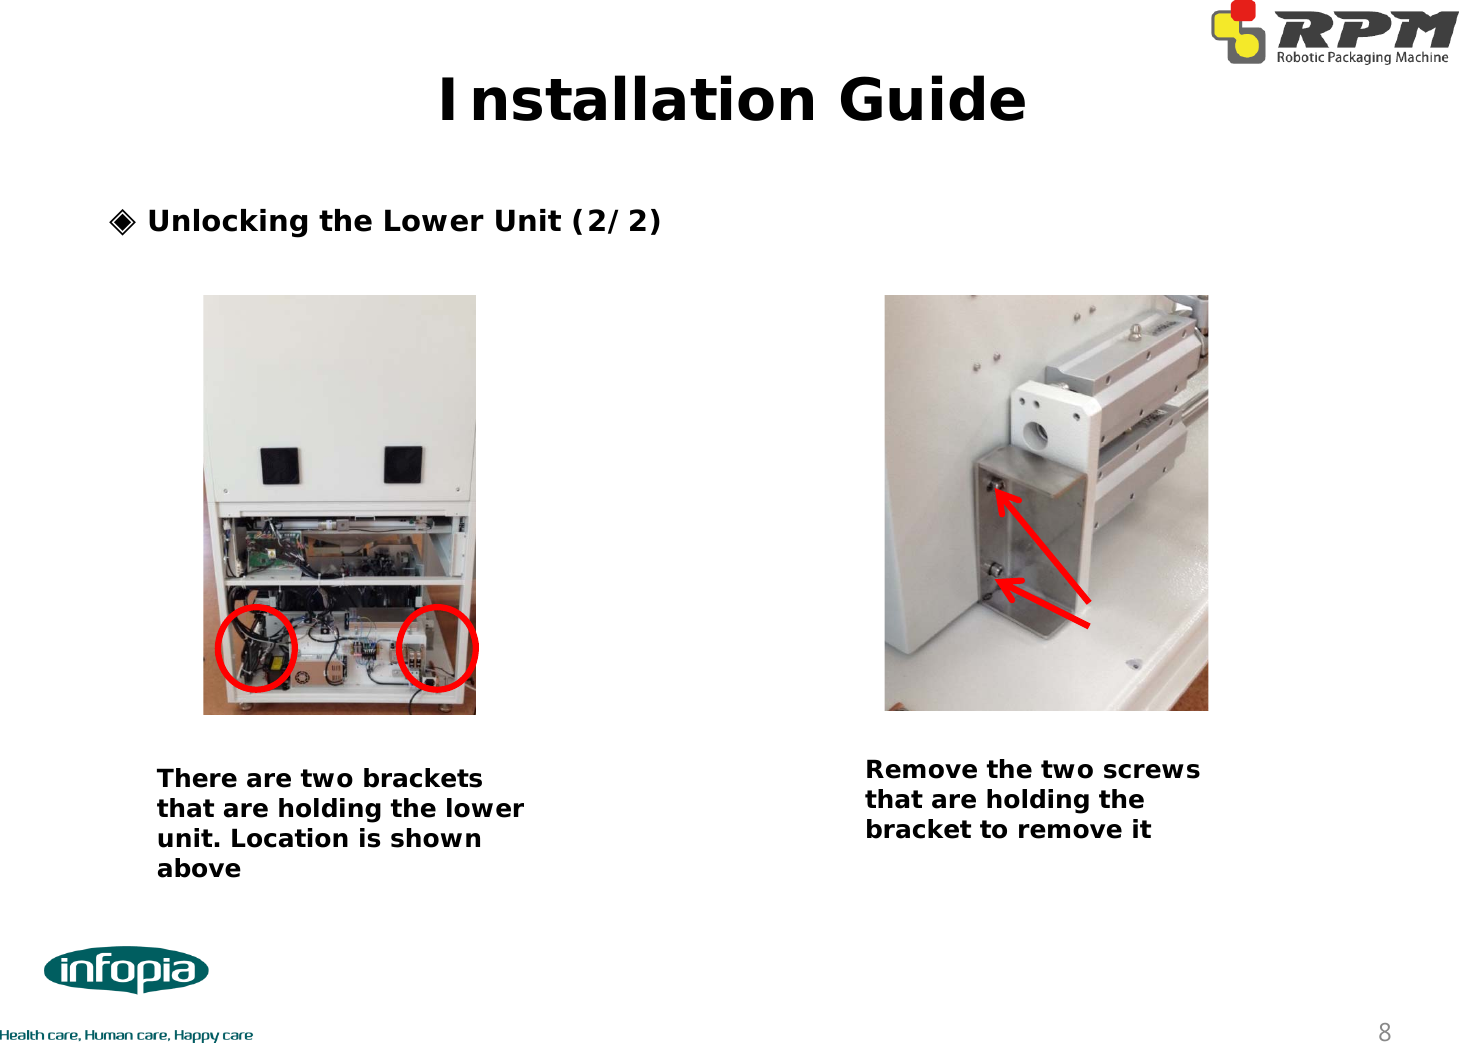 Installation Guide8◈Unlocking the Lower Unit (2/2)There are two brackets that are holding the lower unit. Location is shown aboveRemove the two screws that are holding the bracket to remove it